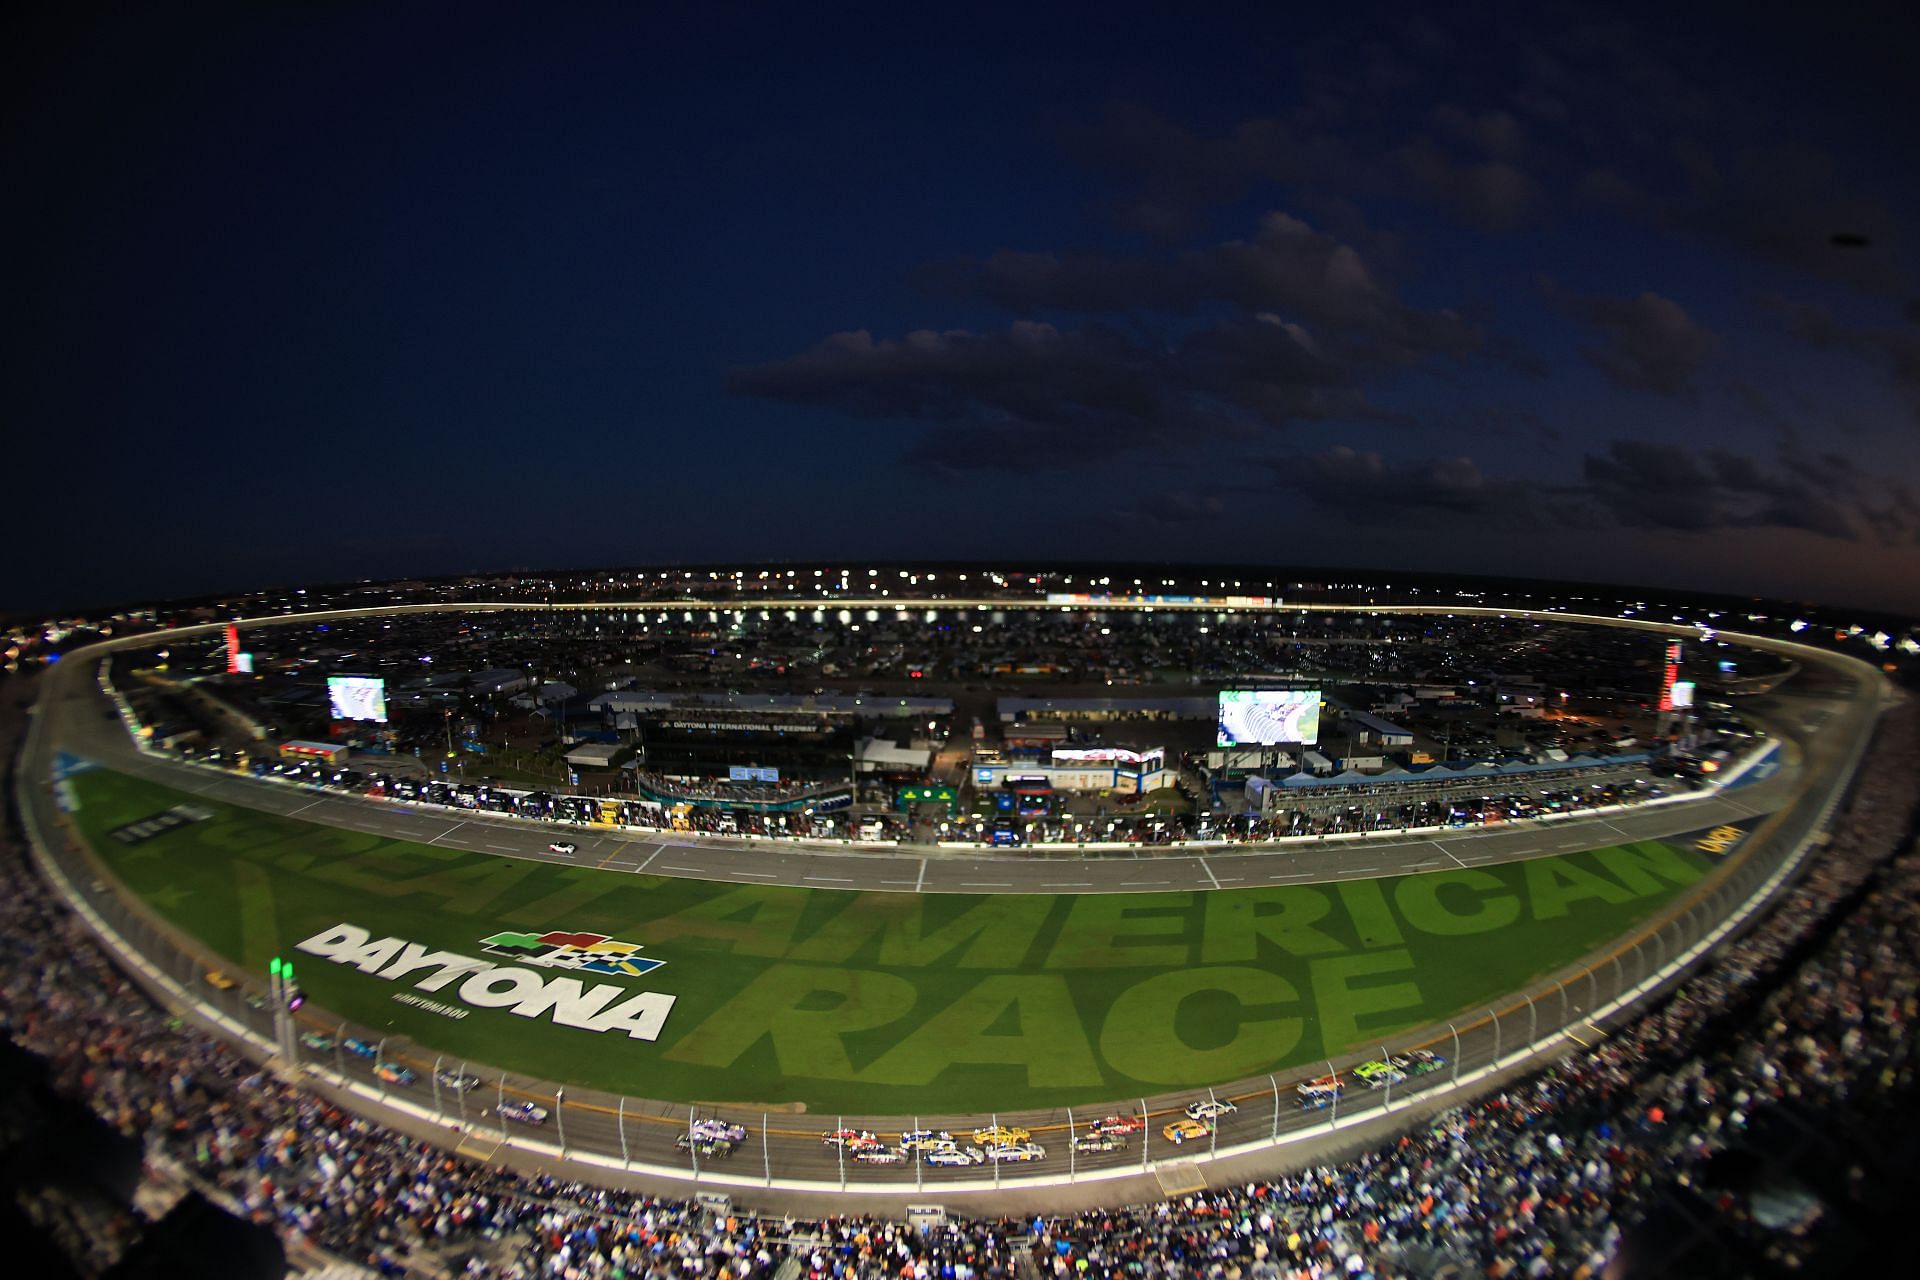 The Daytona International Speedway on the eve of the 64th edition of the Great American Race (Photo by Mike Ehrmann/Getty Images)